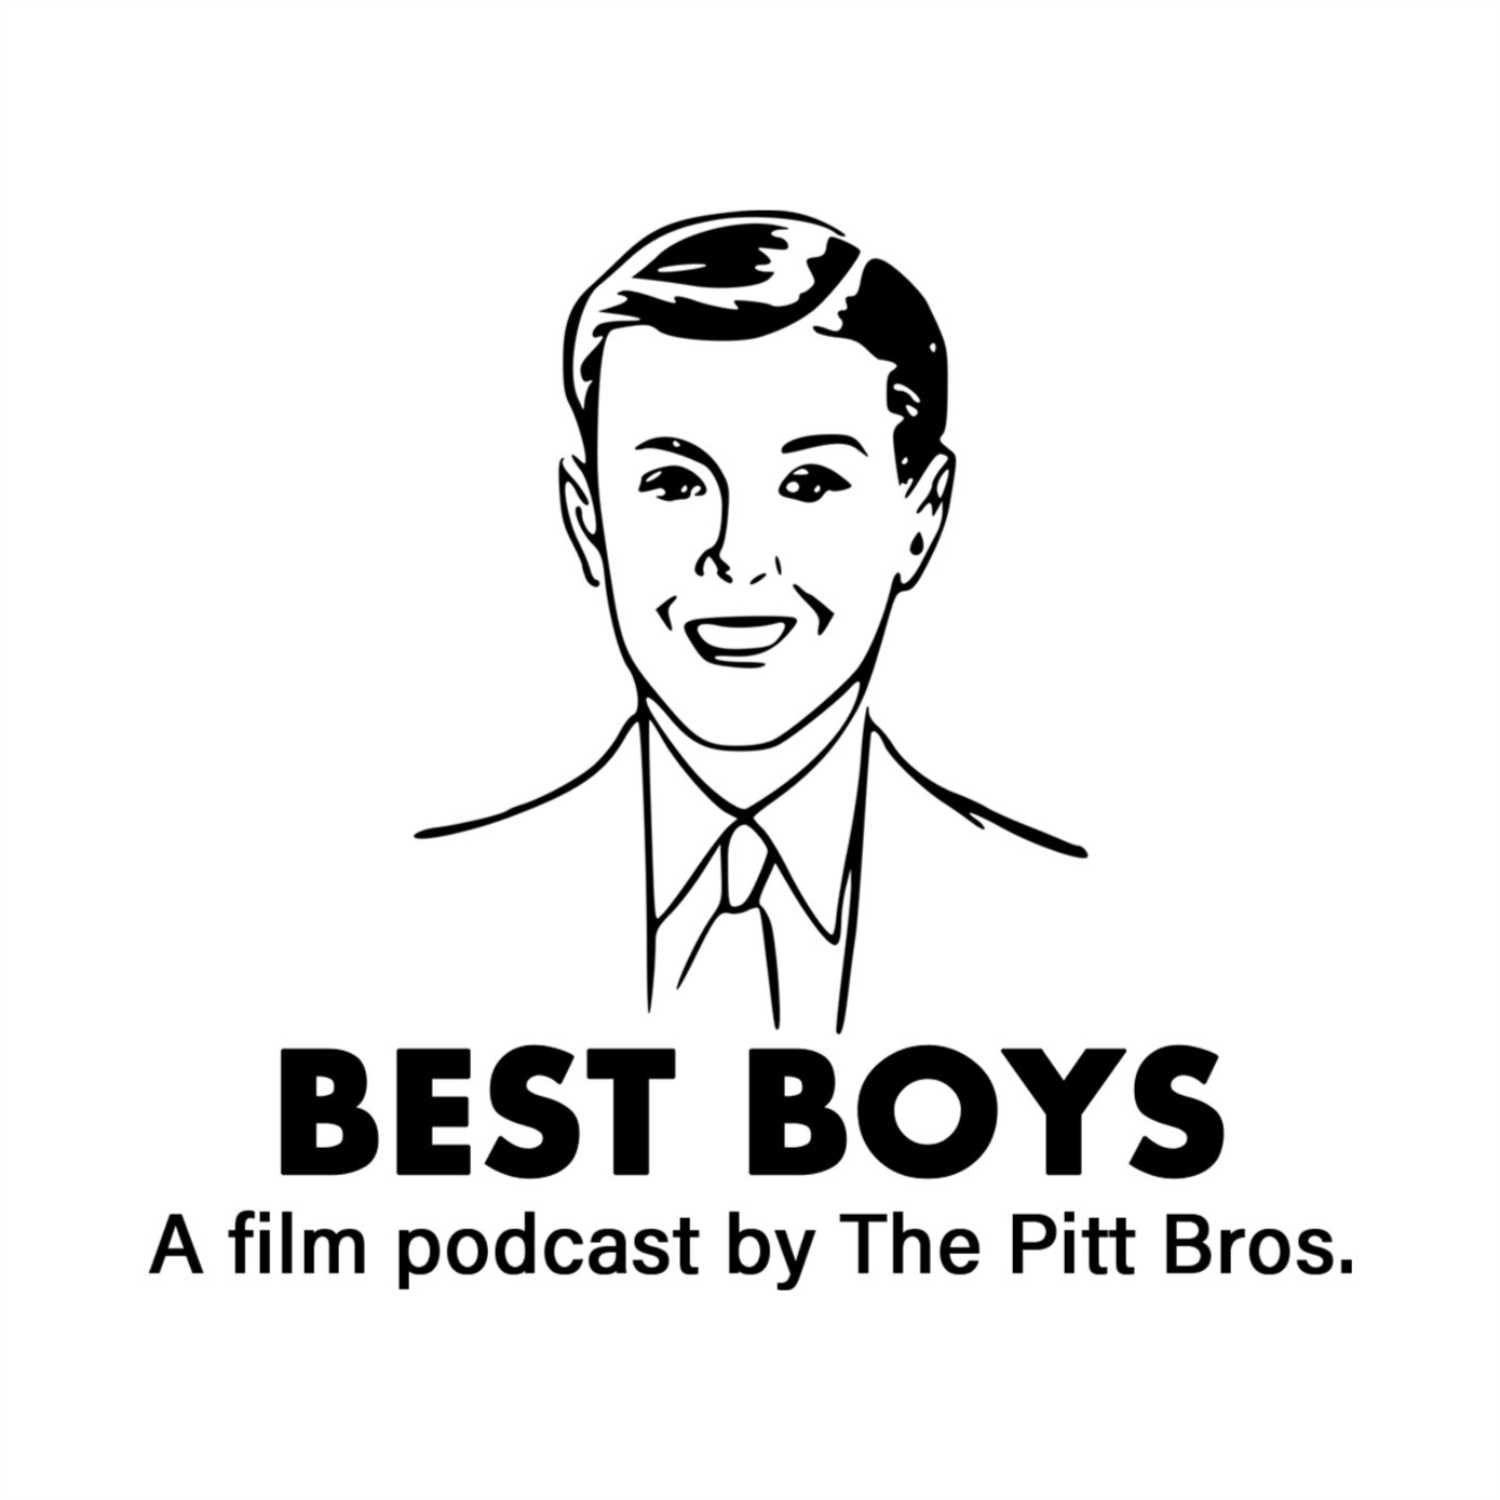 BEST BOYS: A film podcast #55 - One Flew Over the Cuckoo's Nest, Amadeus